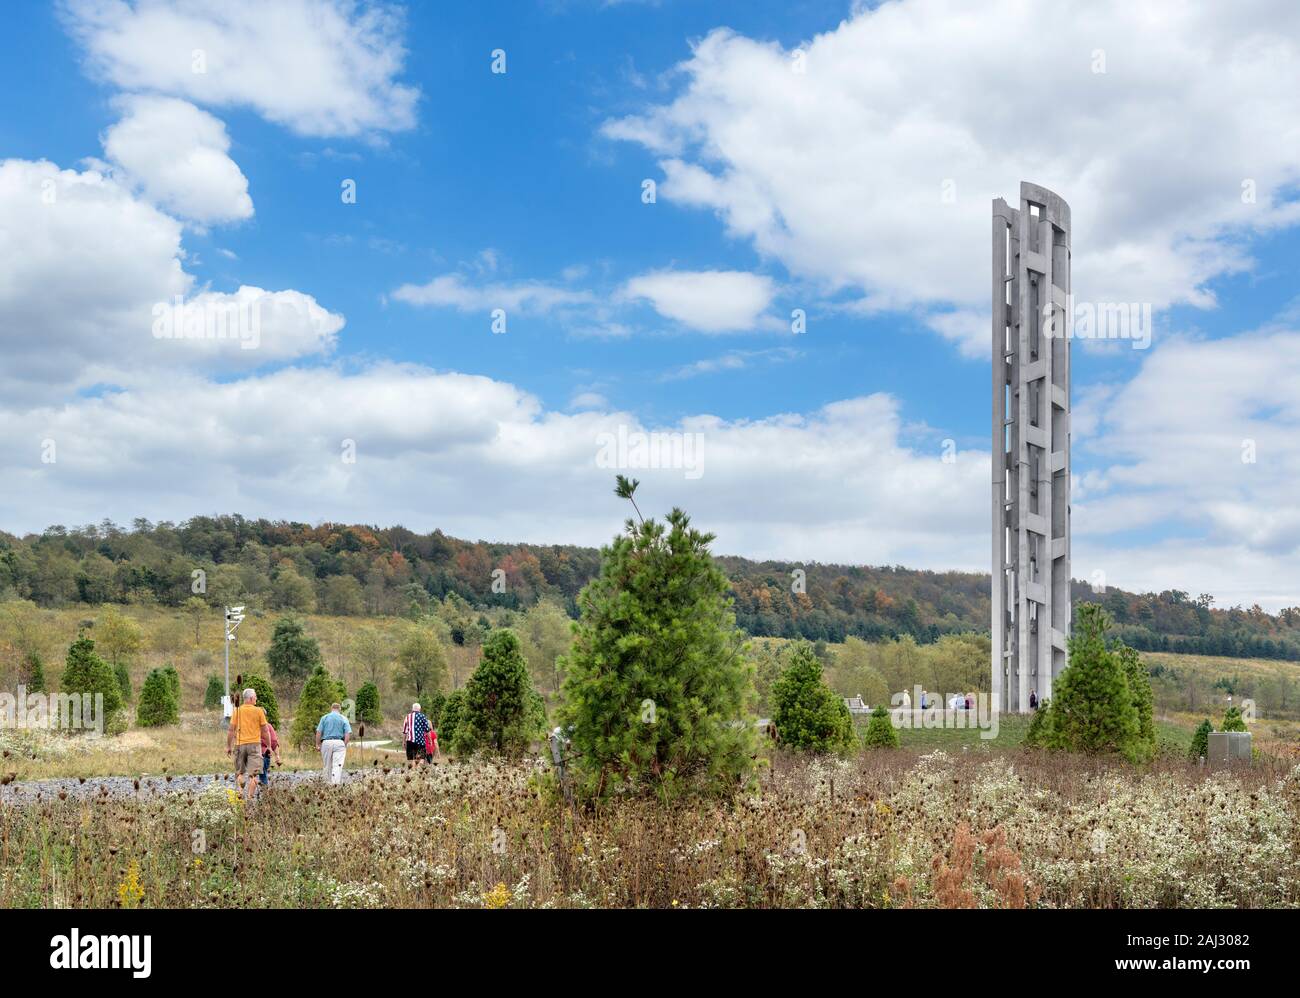 The Tower of Voices at the Flight 93 National Memorial, Stonycreek, near Shanksville, Pennsylvania, USA. Stock Photo